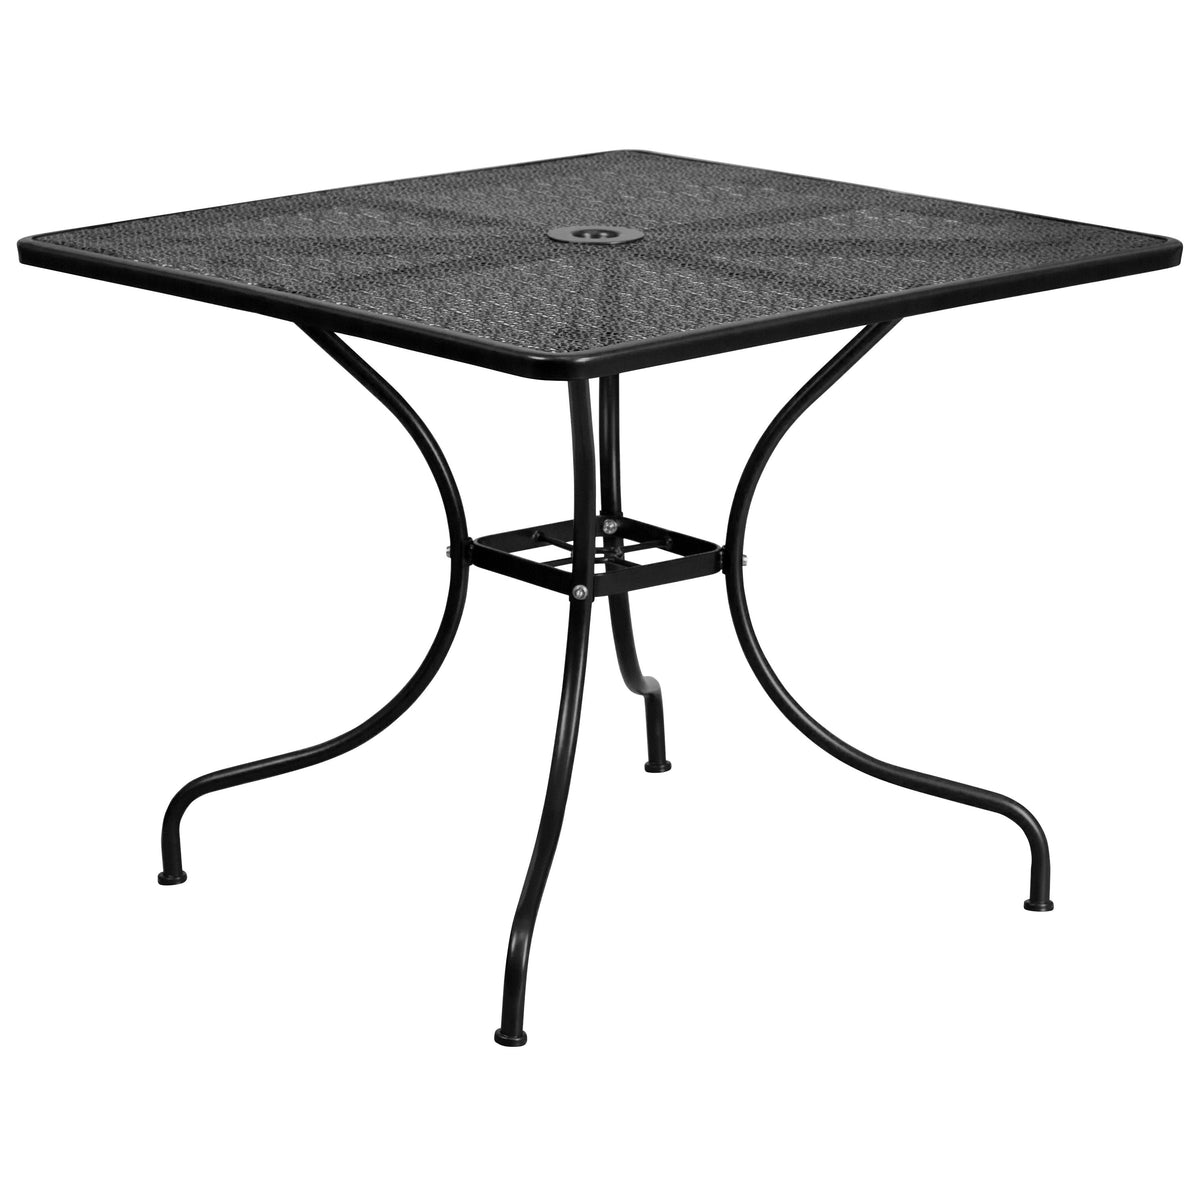 Black |#| 35.5inch Square Black Indoor-Outdoor Steel Patio Table Set w/ 2 Square Back Chairs